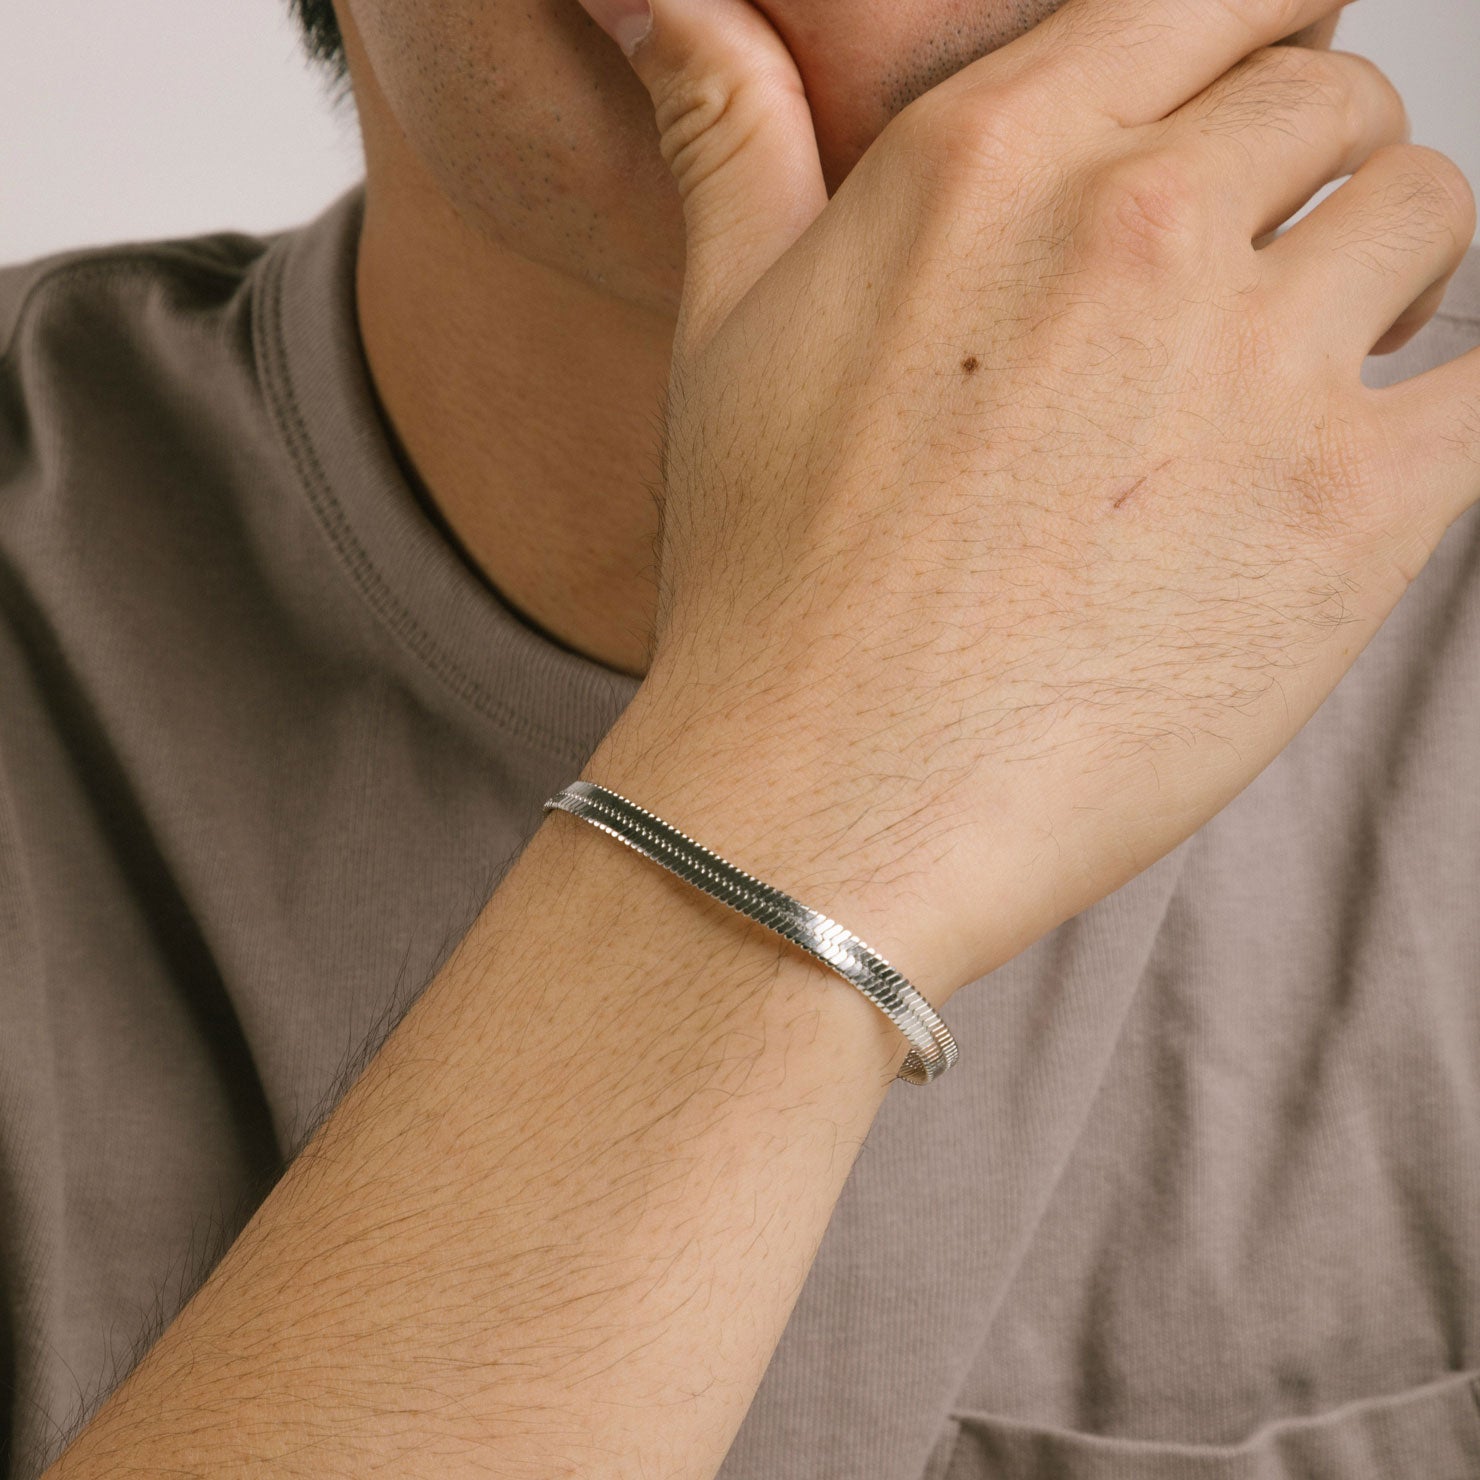 A model wearing the Herringbone Chain Bracelet in Silver is crafted with stainless steel and measures 18cm long and 5mm wide. It is also non-tarnish and water resistant.